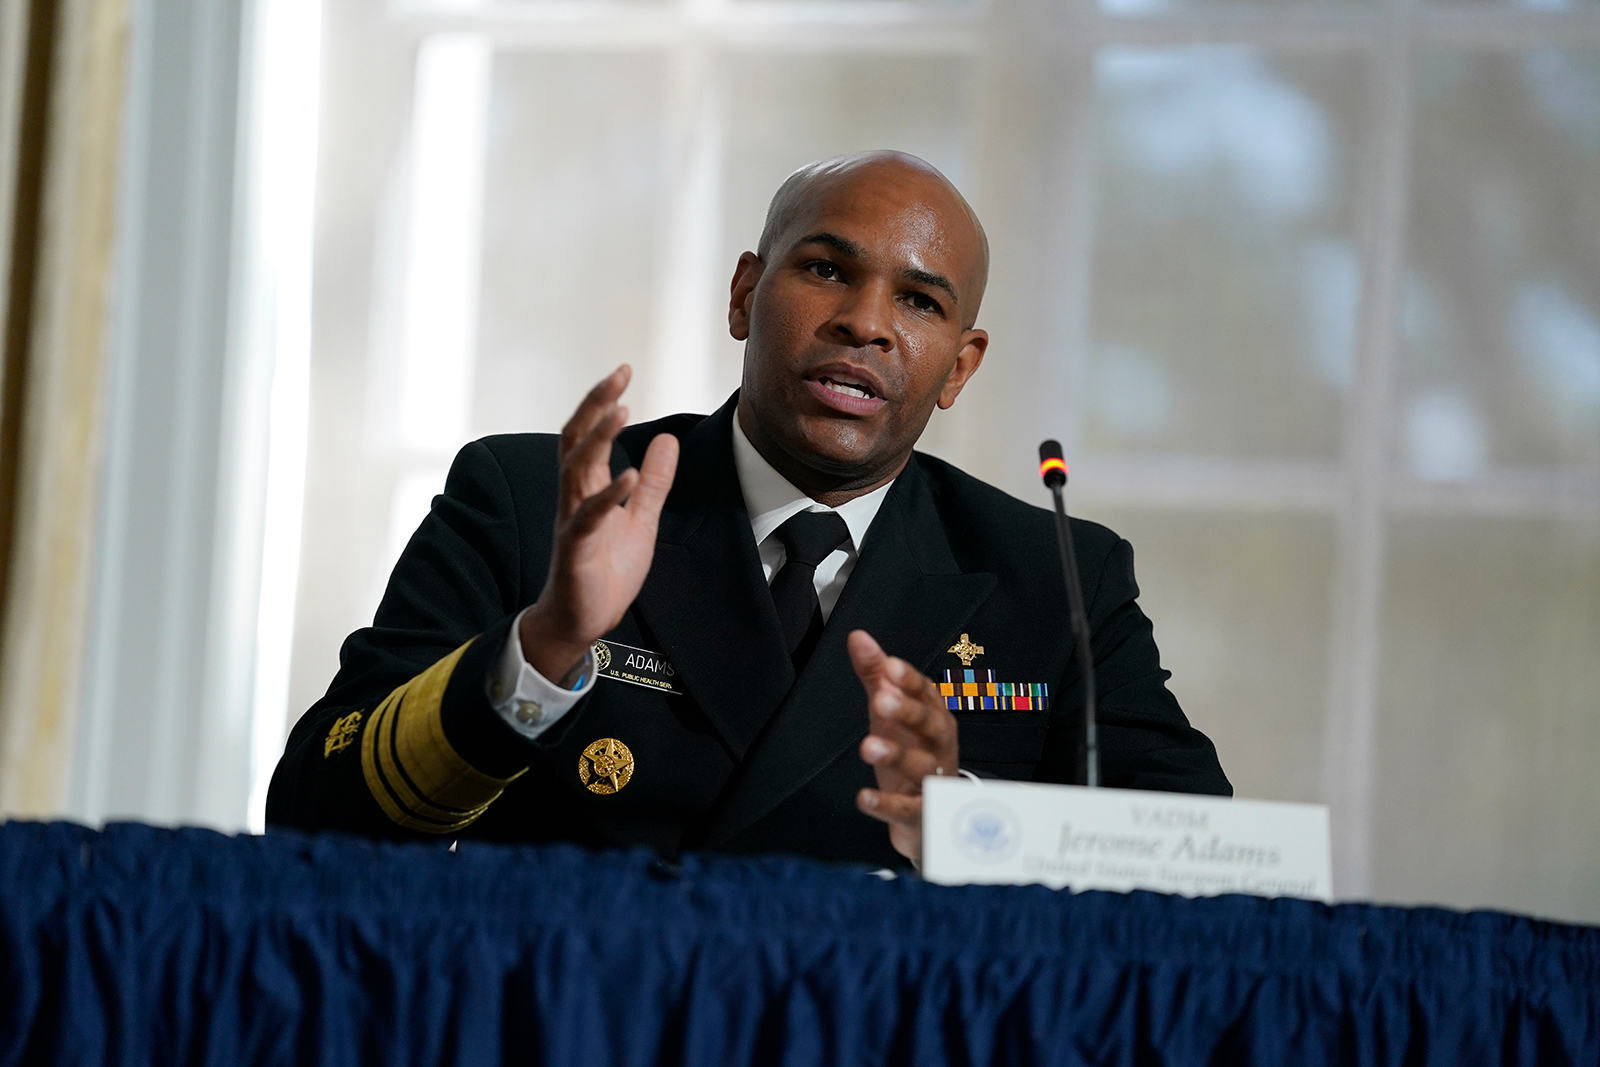 Surgeon General Jerome Adams speaks during a round table on donating plasma at the American Red Cross national headquarters on Thursday, July 30, in Washington.